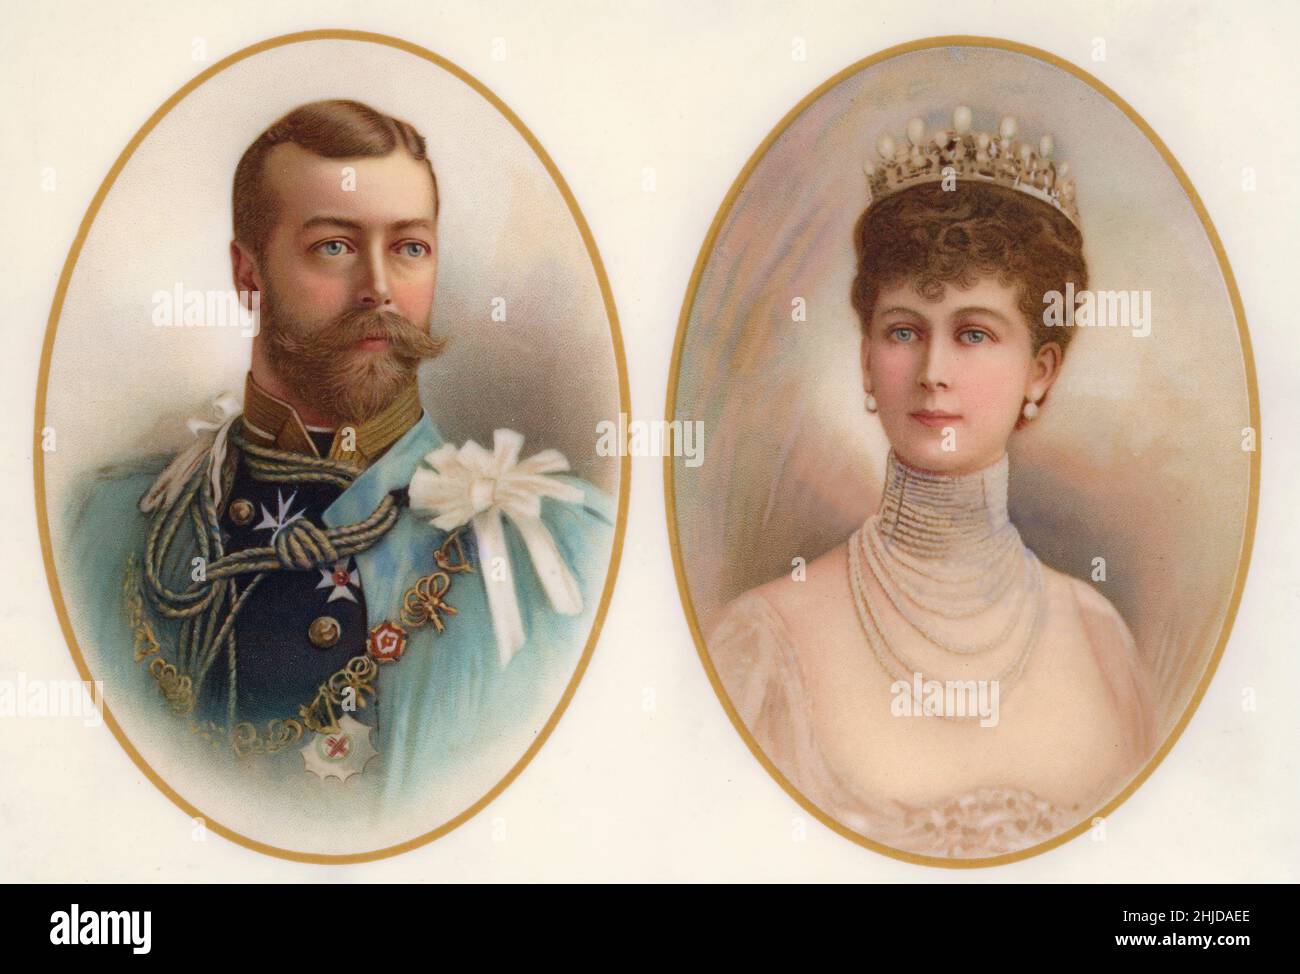 George V. King of the United Kingdom and the British Dominions and Emperor of India, born 3 june 1865 dead 20 january 1936. Pictured with his wife Mary of Teck, 1867-1953. They were married in 1893. Stock Photo